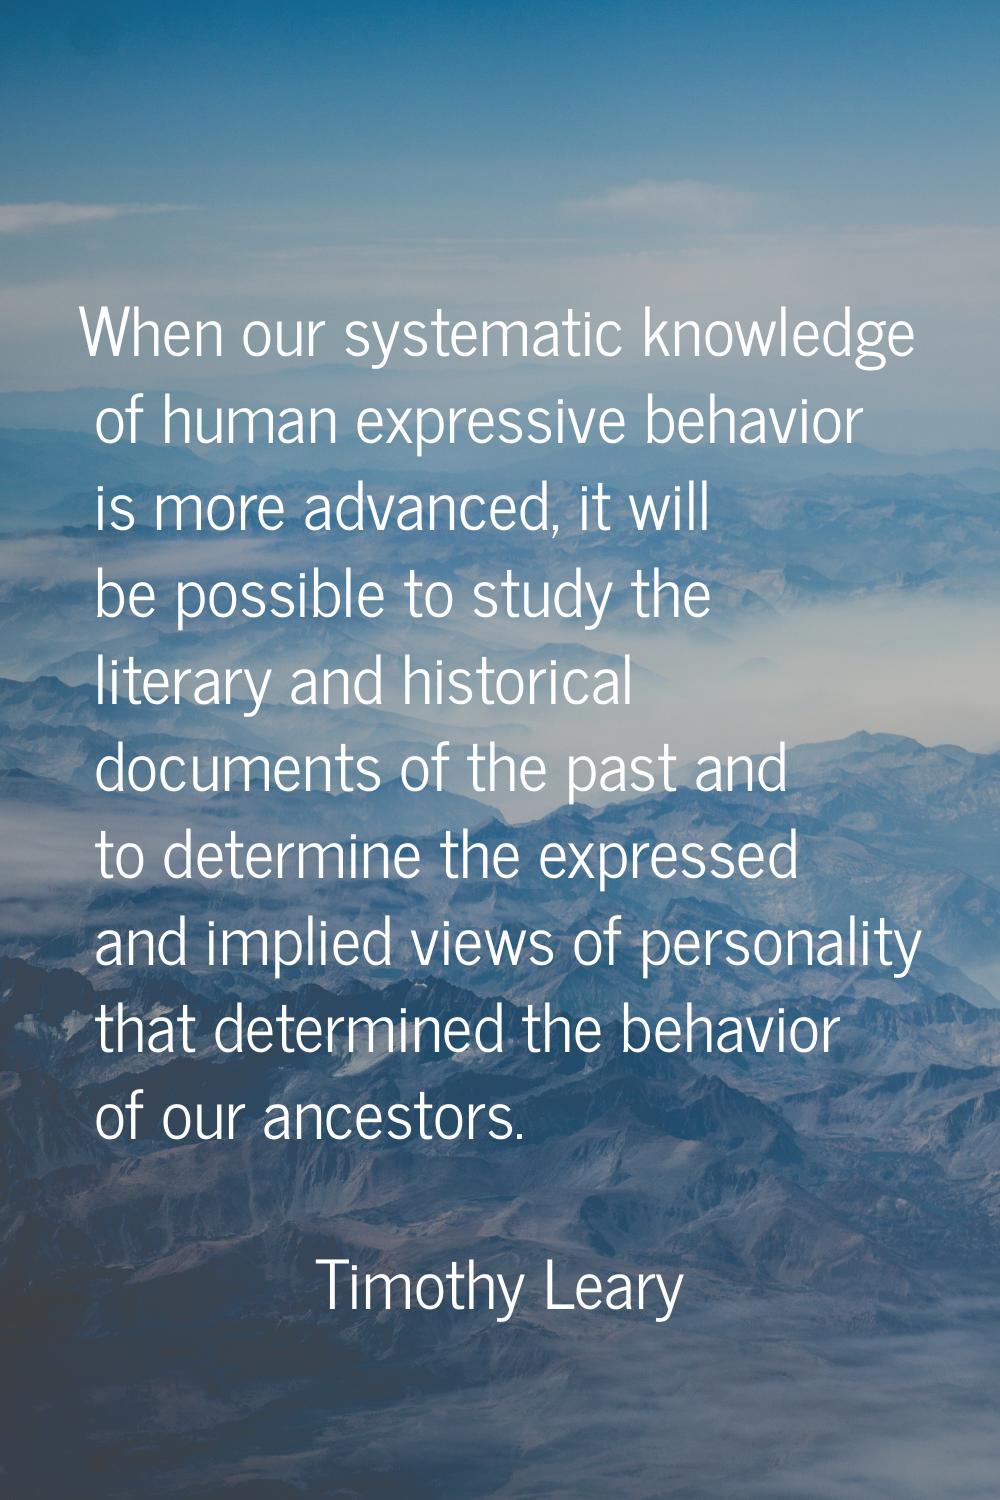 When our systematic knowledge of human expressive behavior is more advanced, it will be possible to